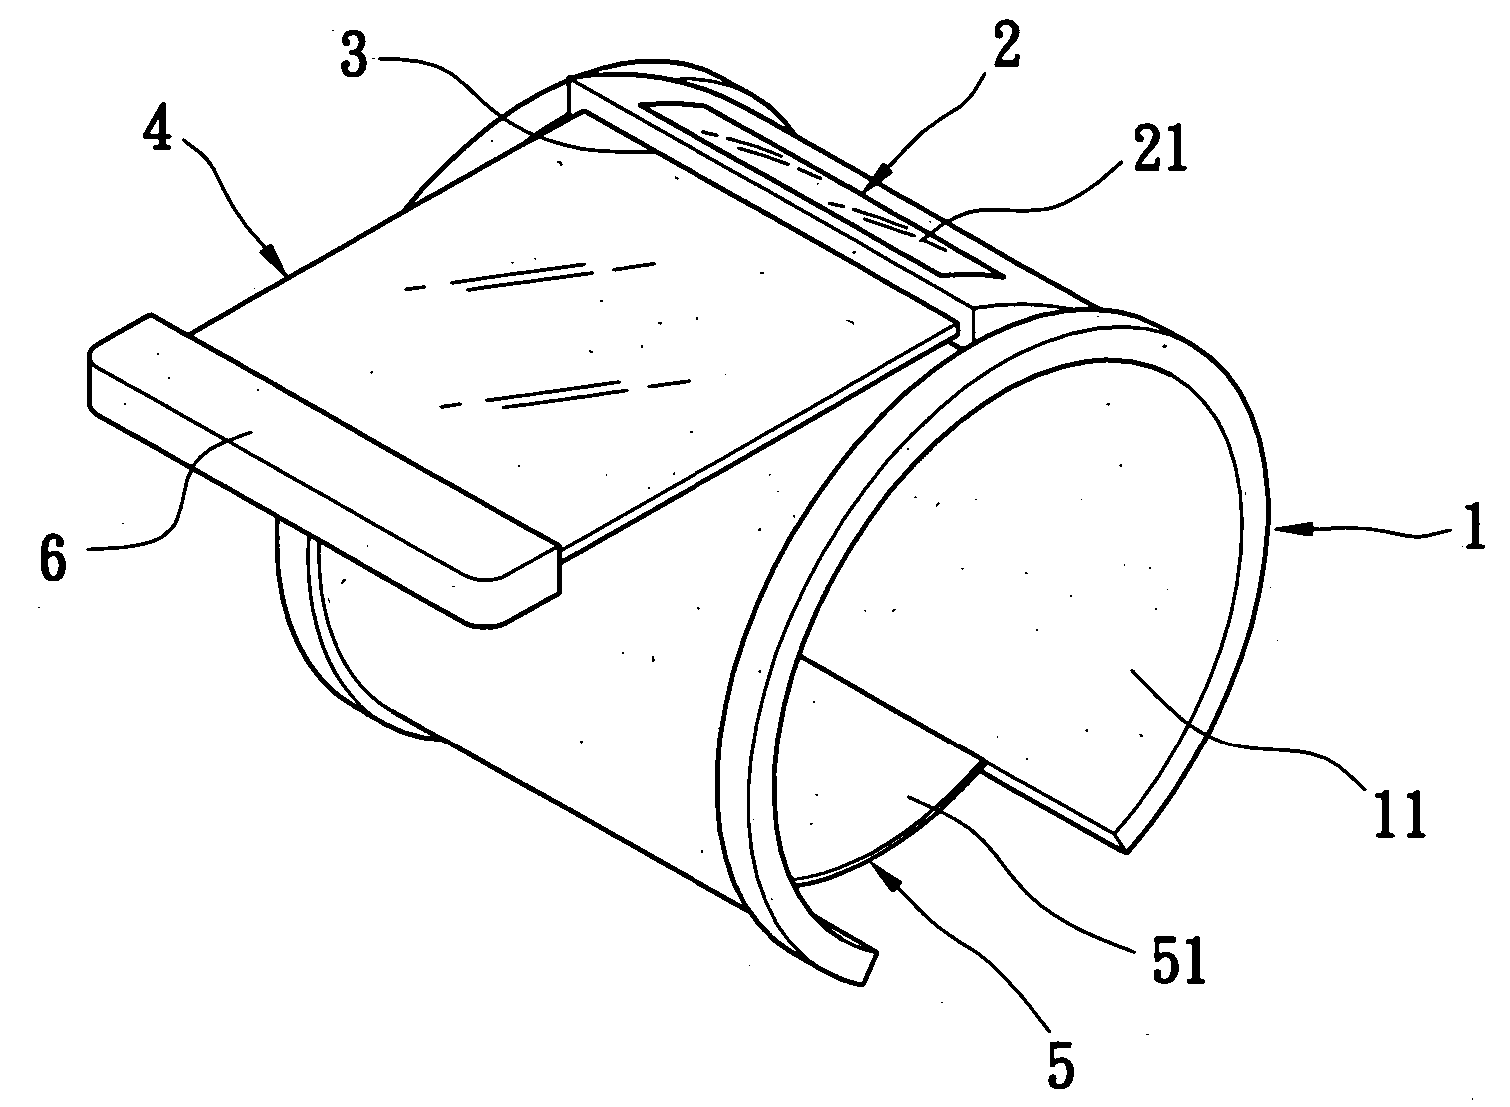 Flexible display device for displaying electronic information